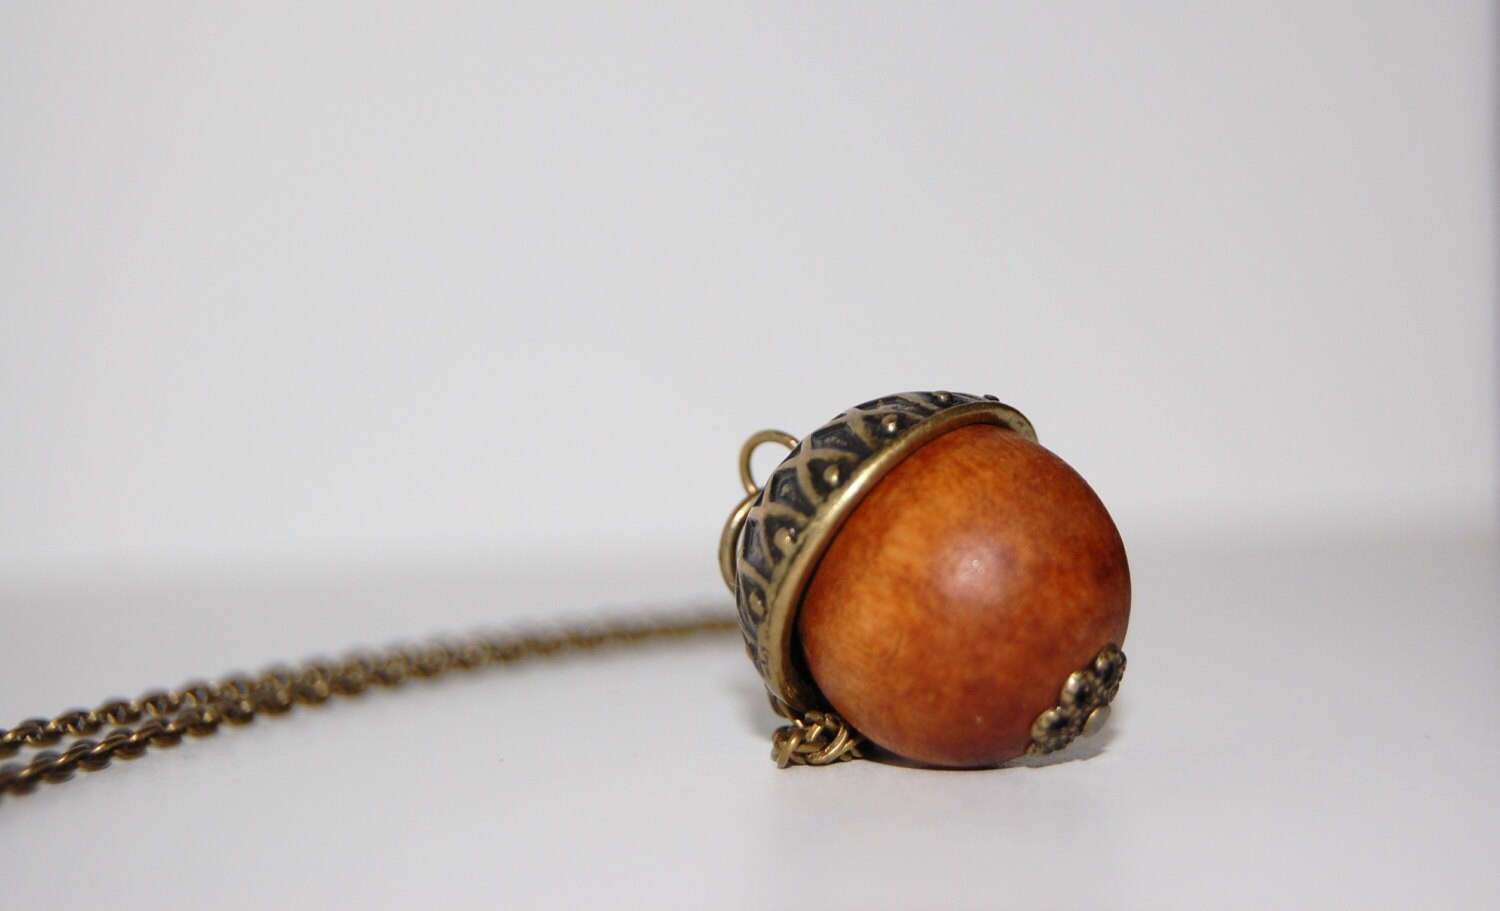 Metal and Wood Acorn Charm Necklace - WinstonGrady